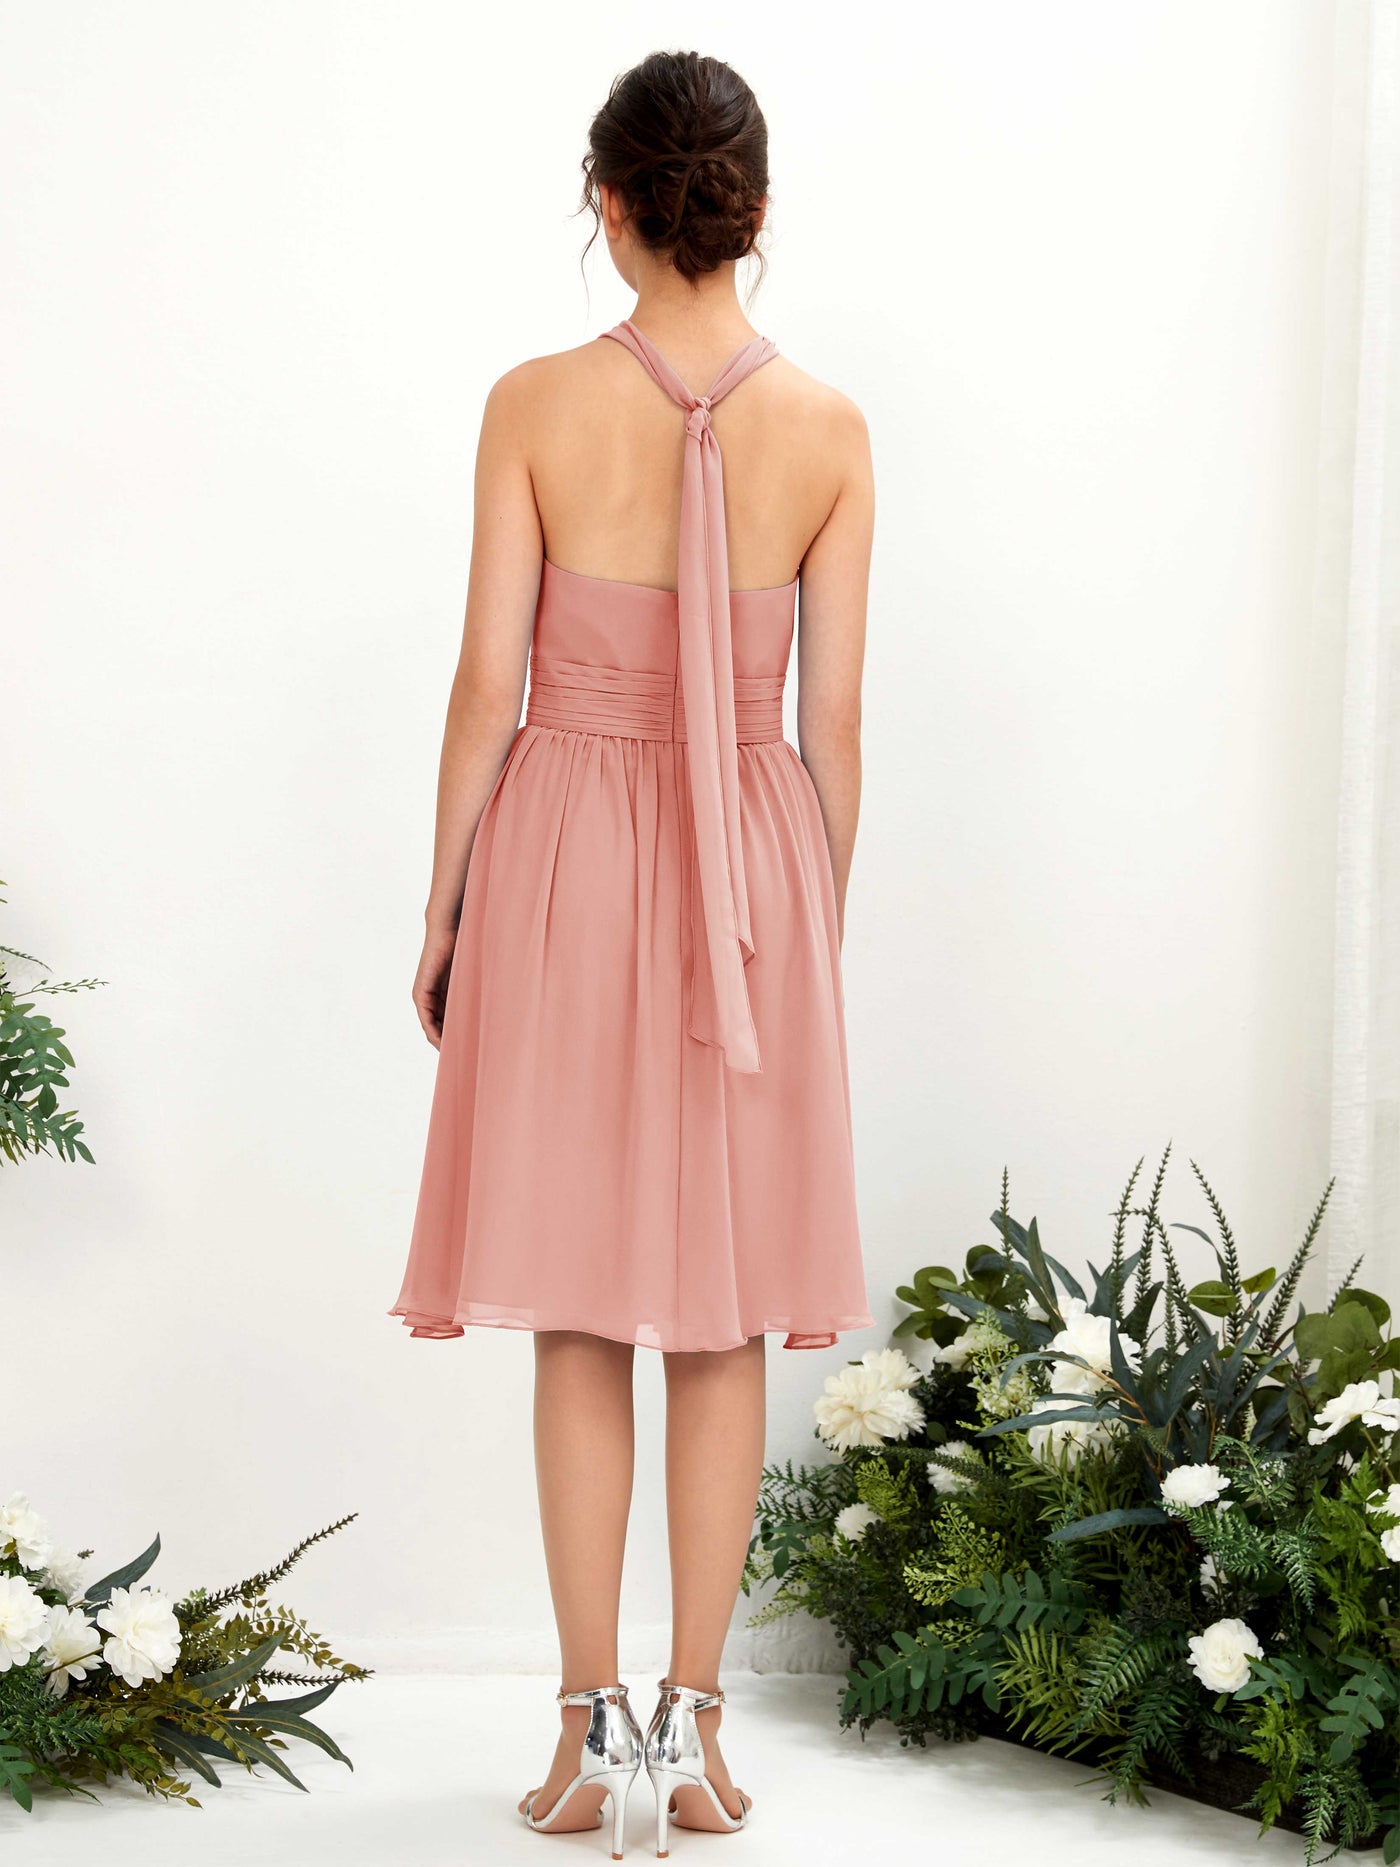 Champagne Rose Bridesmaid Dresses Bridesmaid Dress A-line Chiffon Halter Knee Length Sleeveless Wedding Party Dress (81222606)#color_champagne-rose